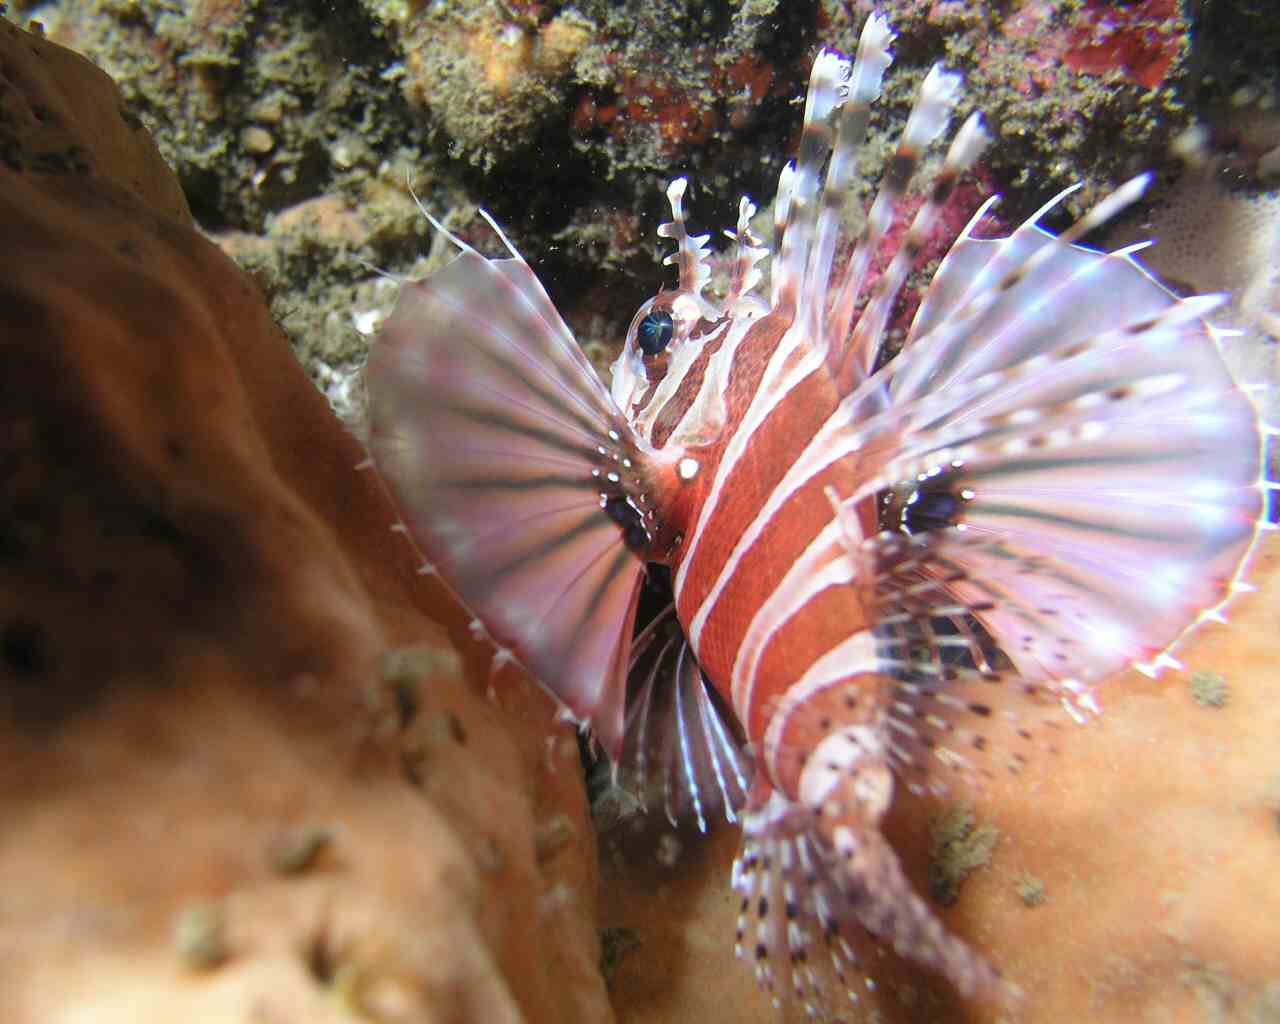 Another lionfish at Lembeh